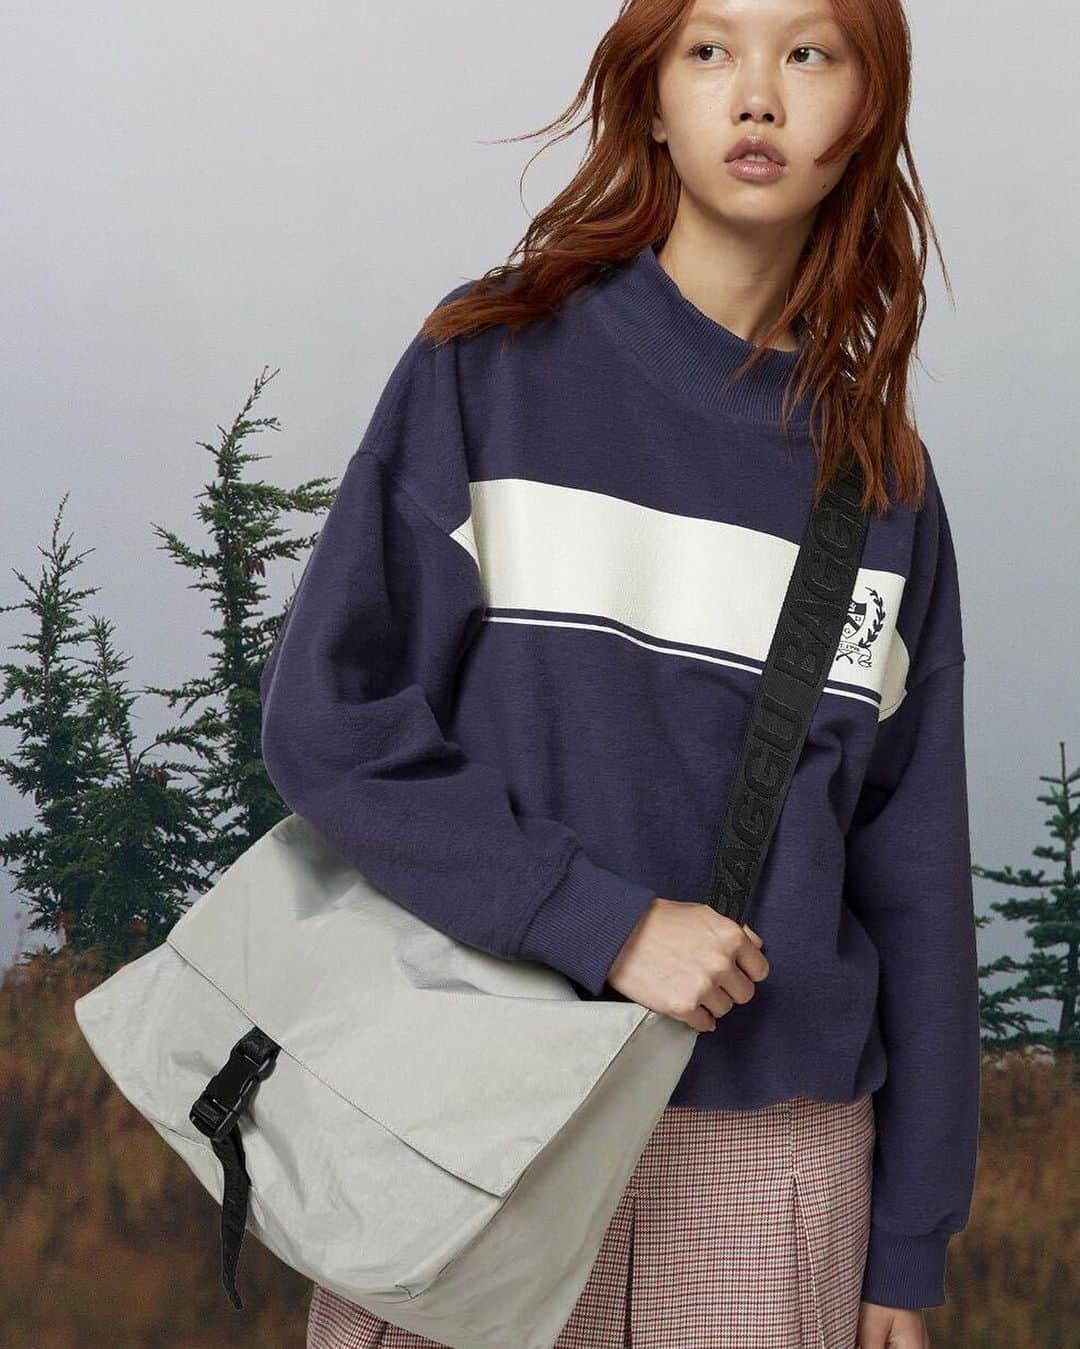 Urban Outfittersのインスタグラム：「Babe, wake up! The new @BAGGU Messenger Bag just dropped. If you thought your Crescent bag held a lot, the Messenger is even more spacious.  Available in three colors, exclusively at urbanoutfitters.com.」